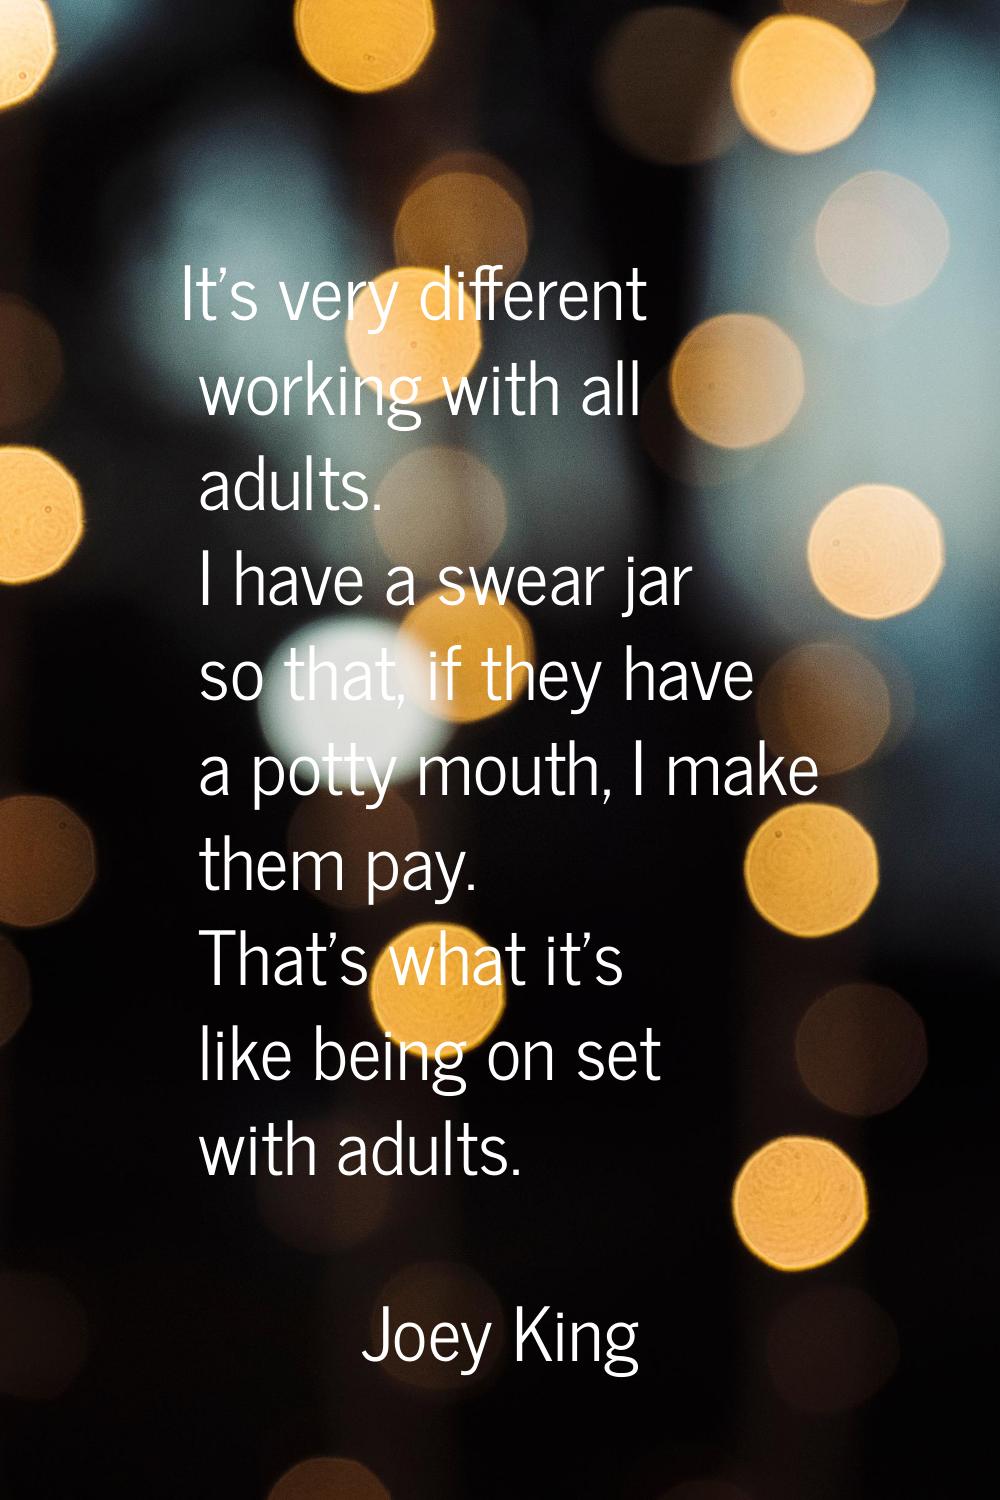 It's very different working with all adults. I have a swear jar so that, if they have a potty mouth